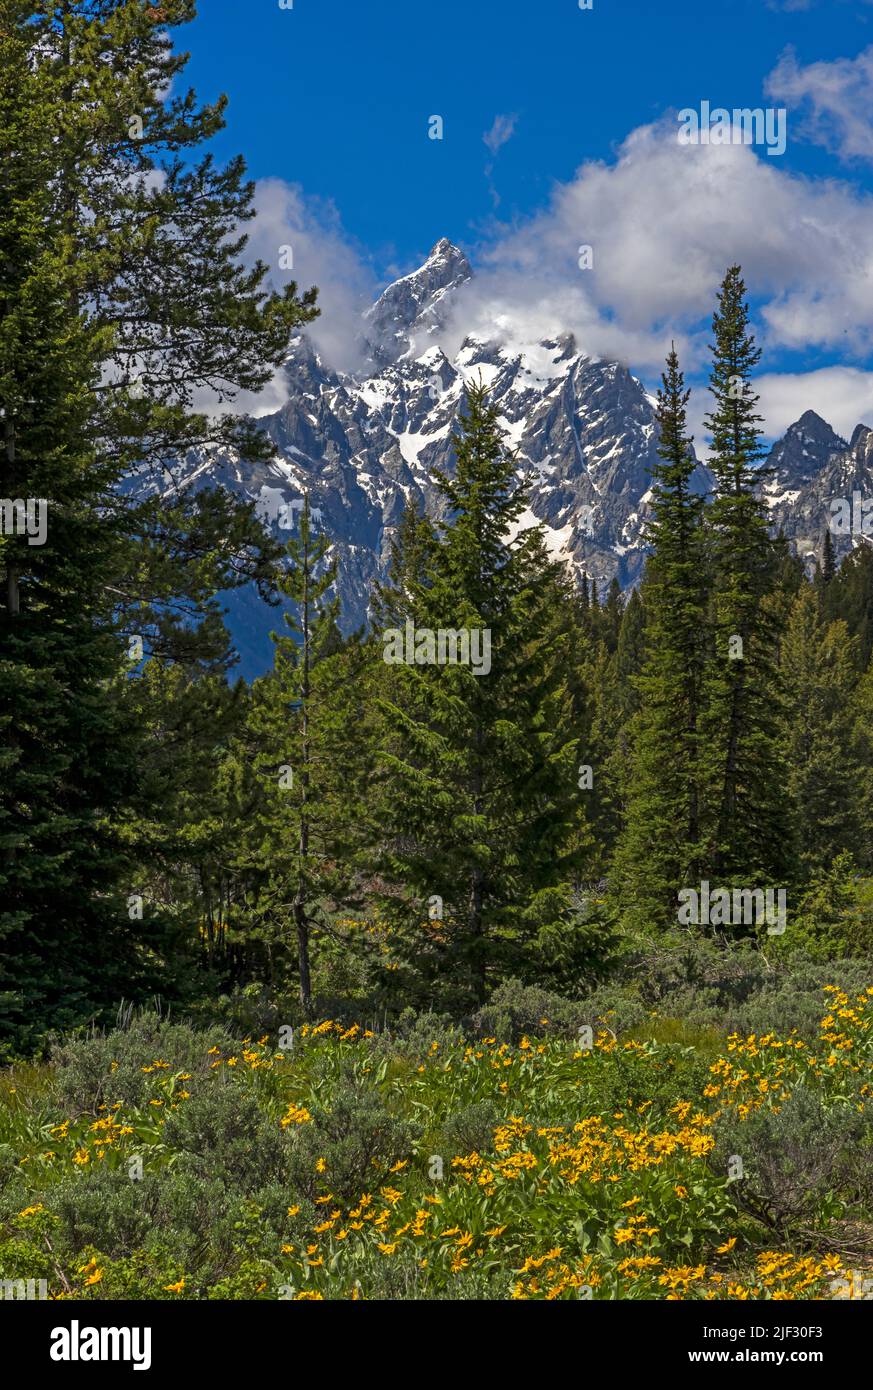 Clouds float by Grand Teton Peak in Grand Teton National Park, Wyoming, USA with a foreground of Arrowleaf Balsamroot wildflowers. Stock Photo